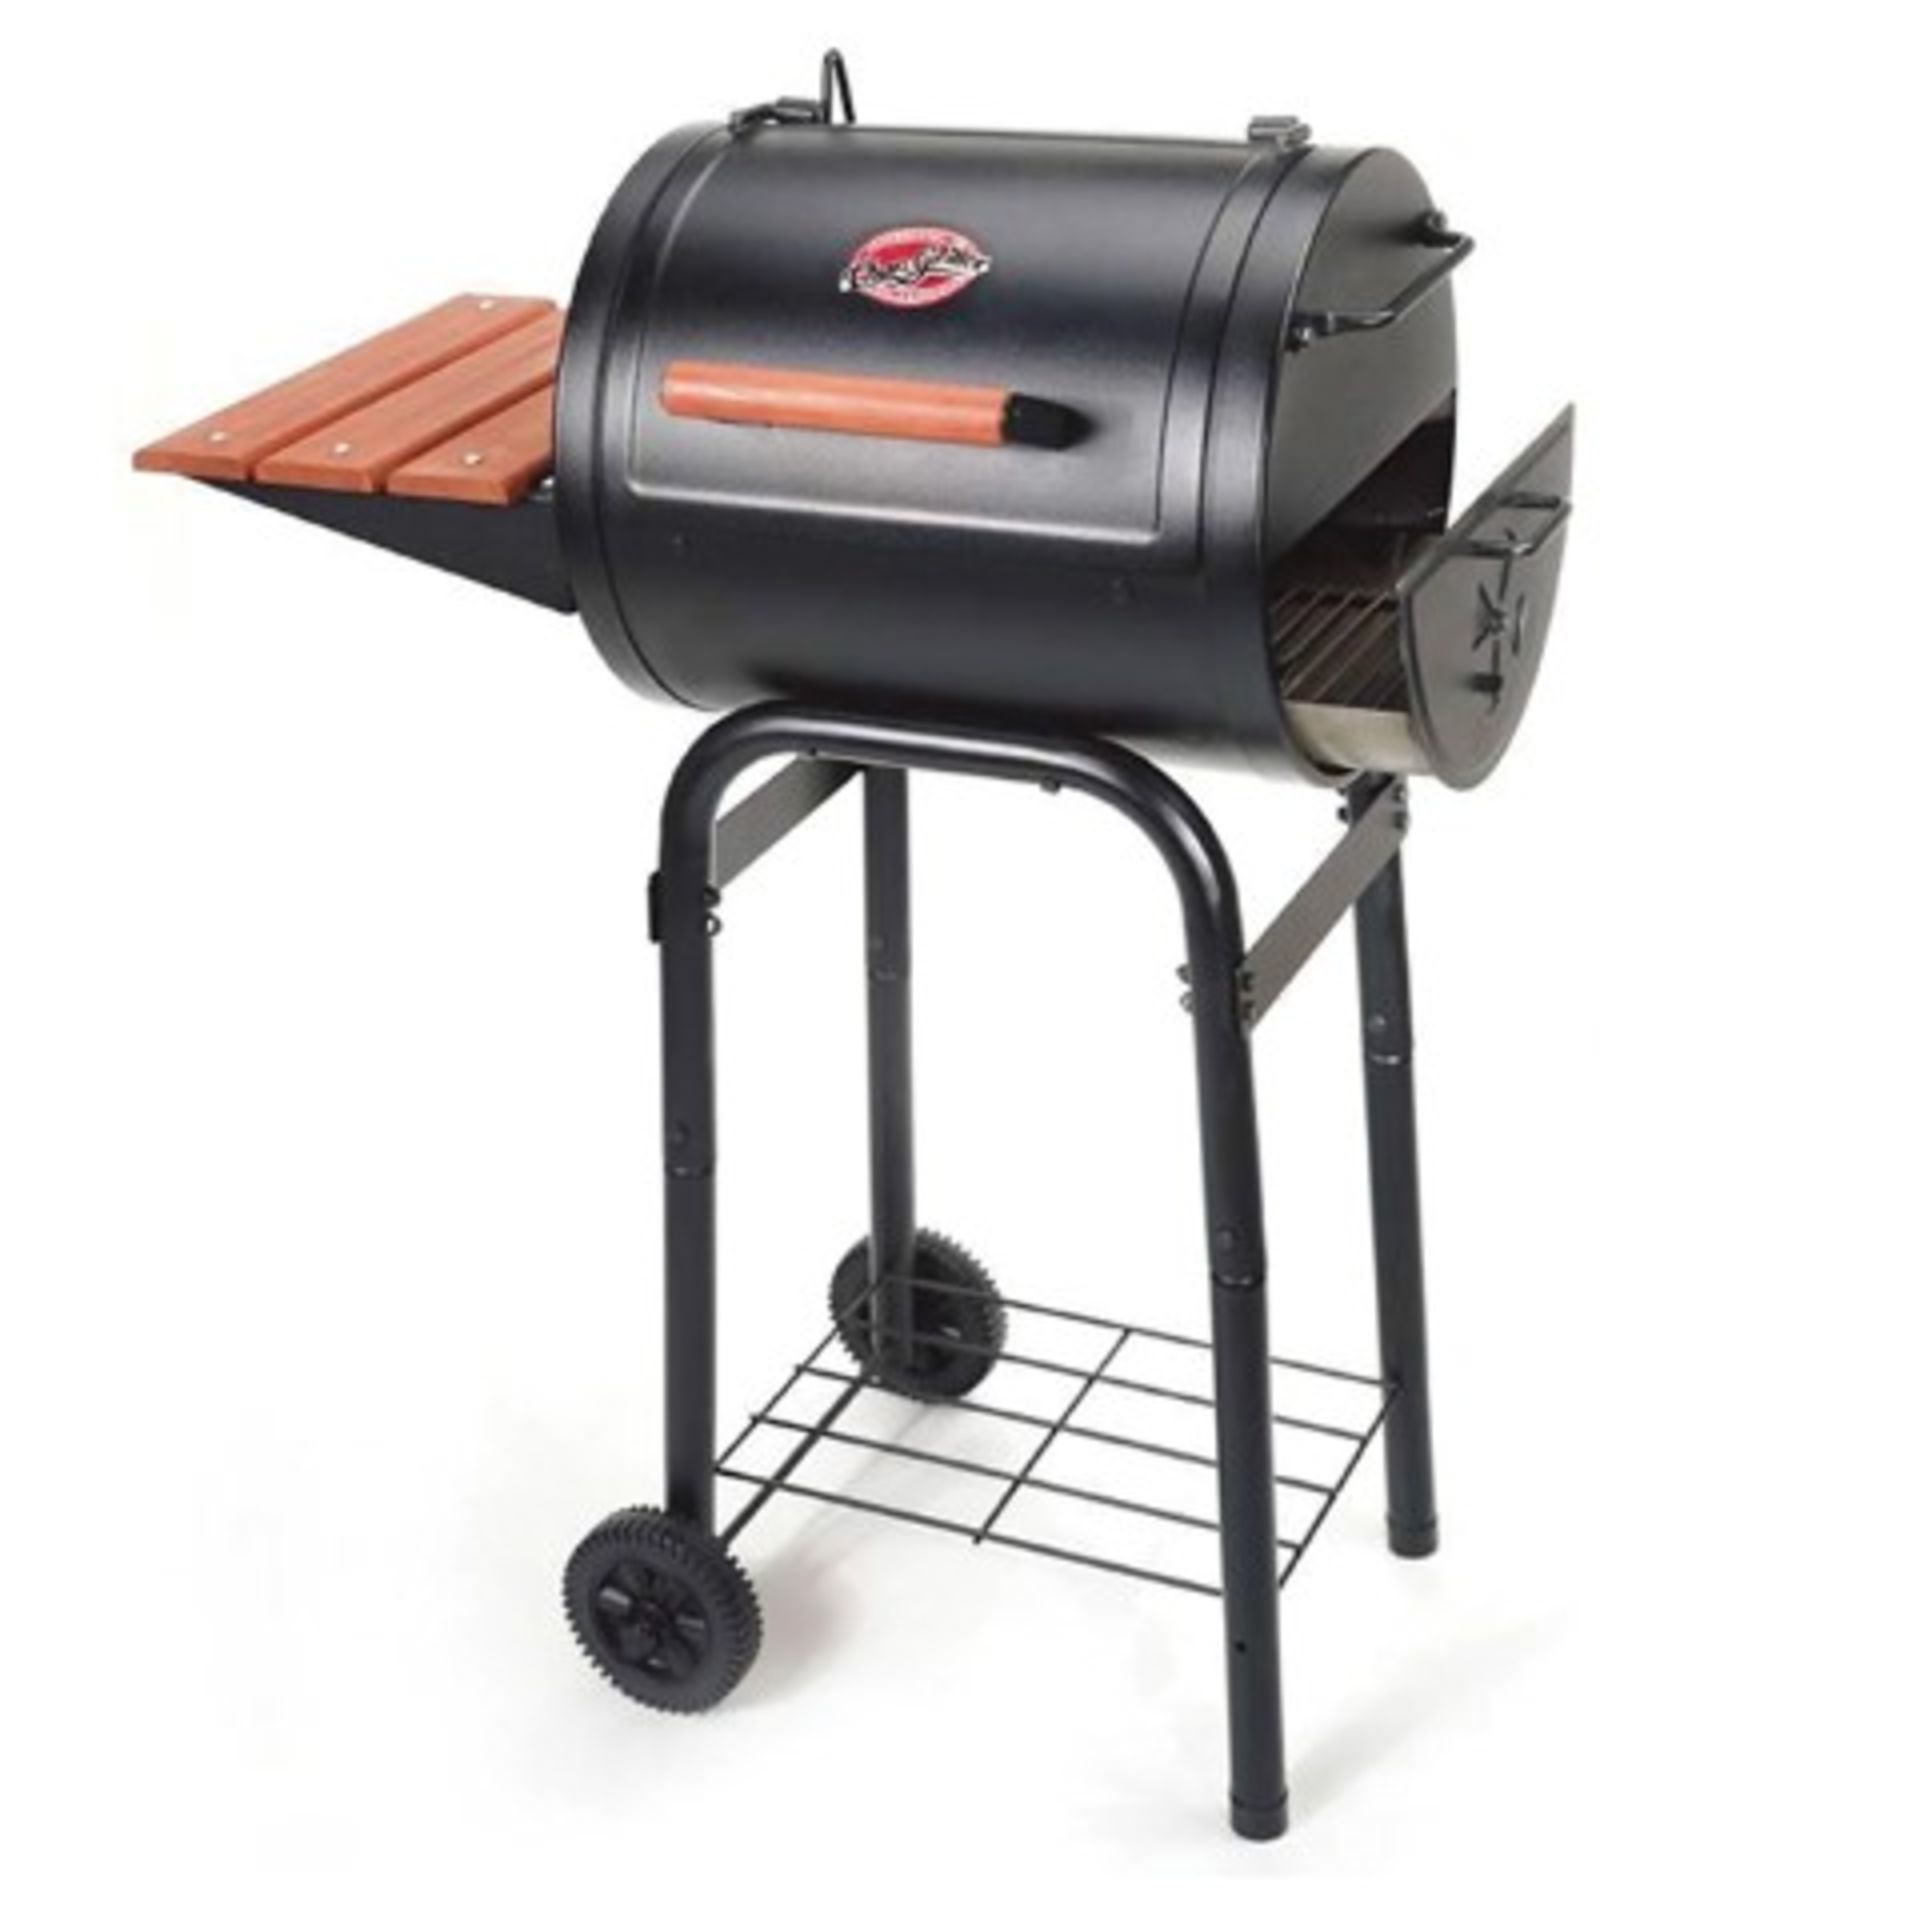 BRAND NEW MEDIUM GRILL PATIO PRO CHARCOAL STANDING BBQ - Image 2 of 2